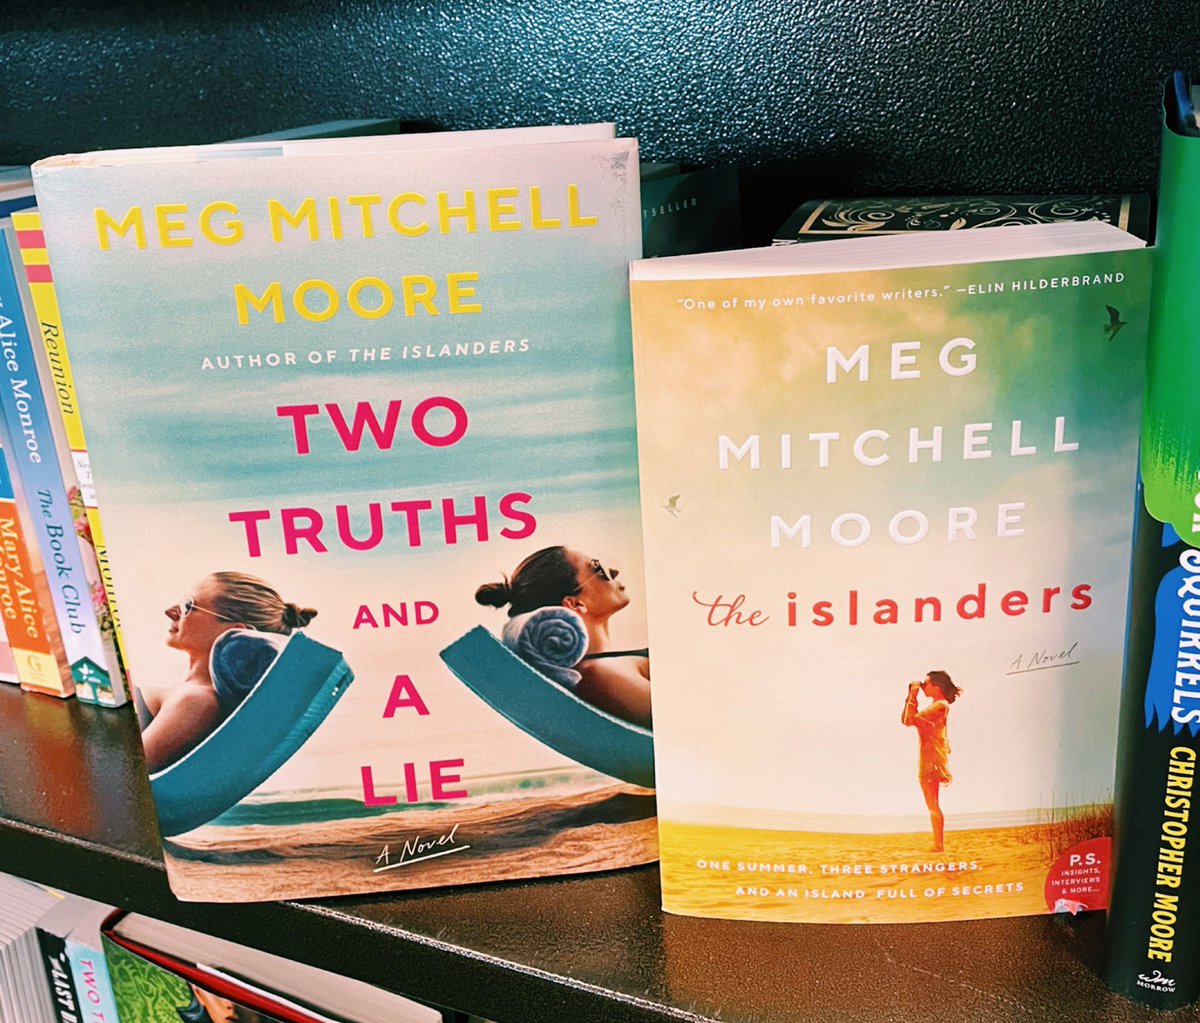 Renee shared 2 #throwbookthursday books she thought were great summer reads! What’s a few of yours? @TBRetc 
@itsbooktalk @WmMorrowBooks #tbt #backlistbooks